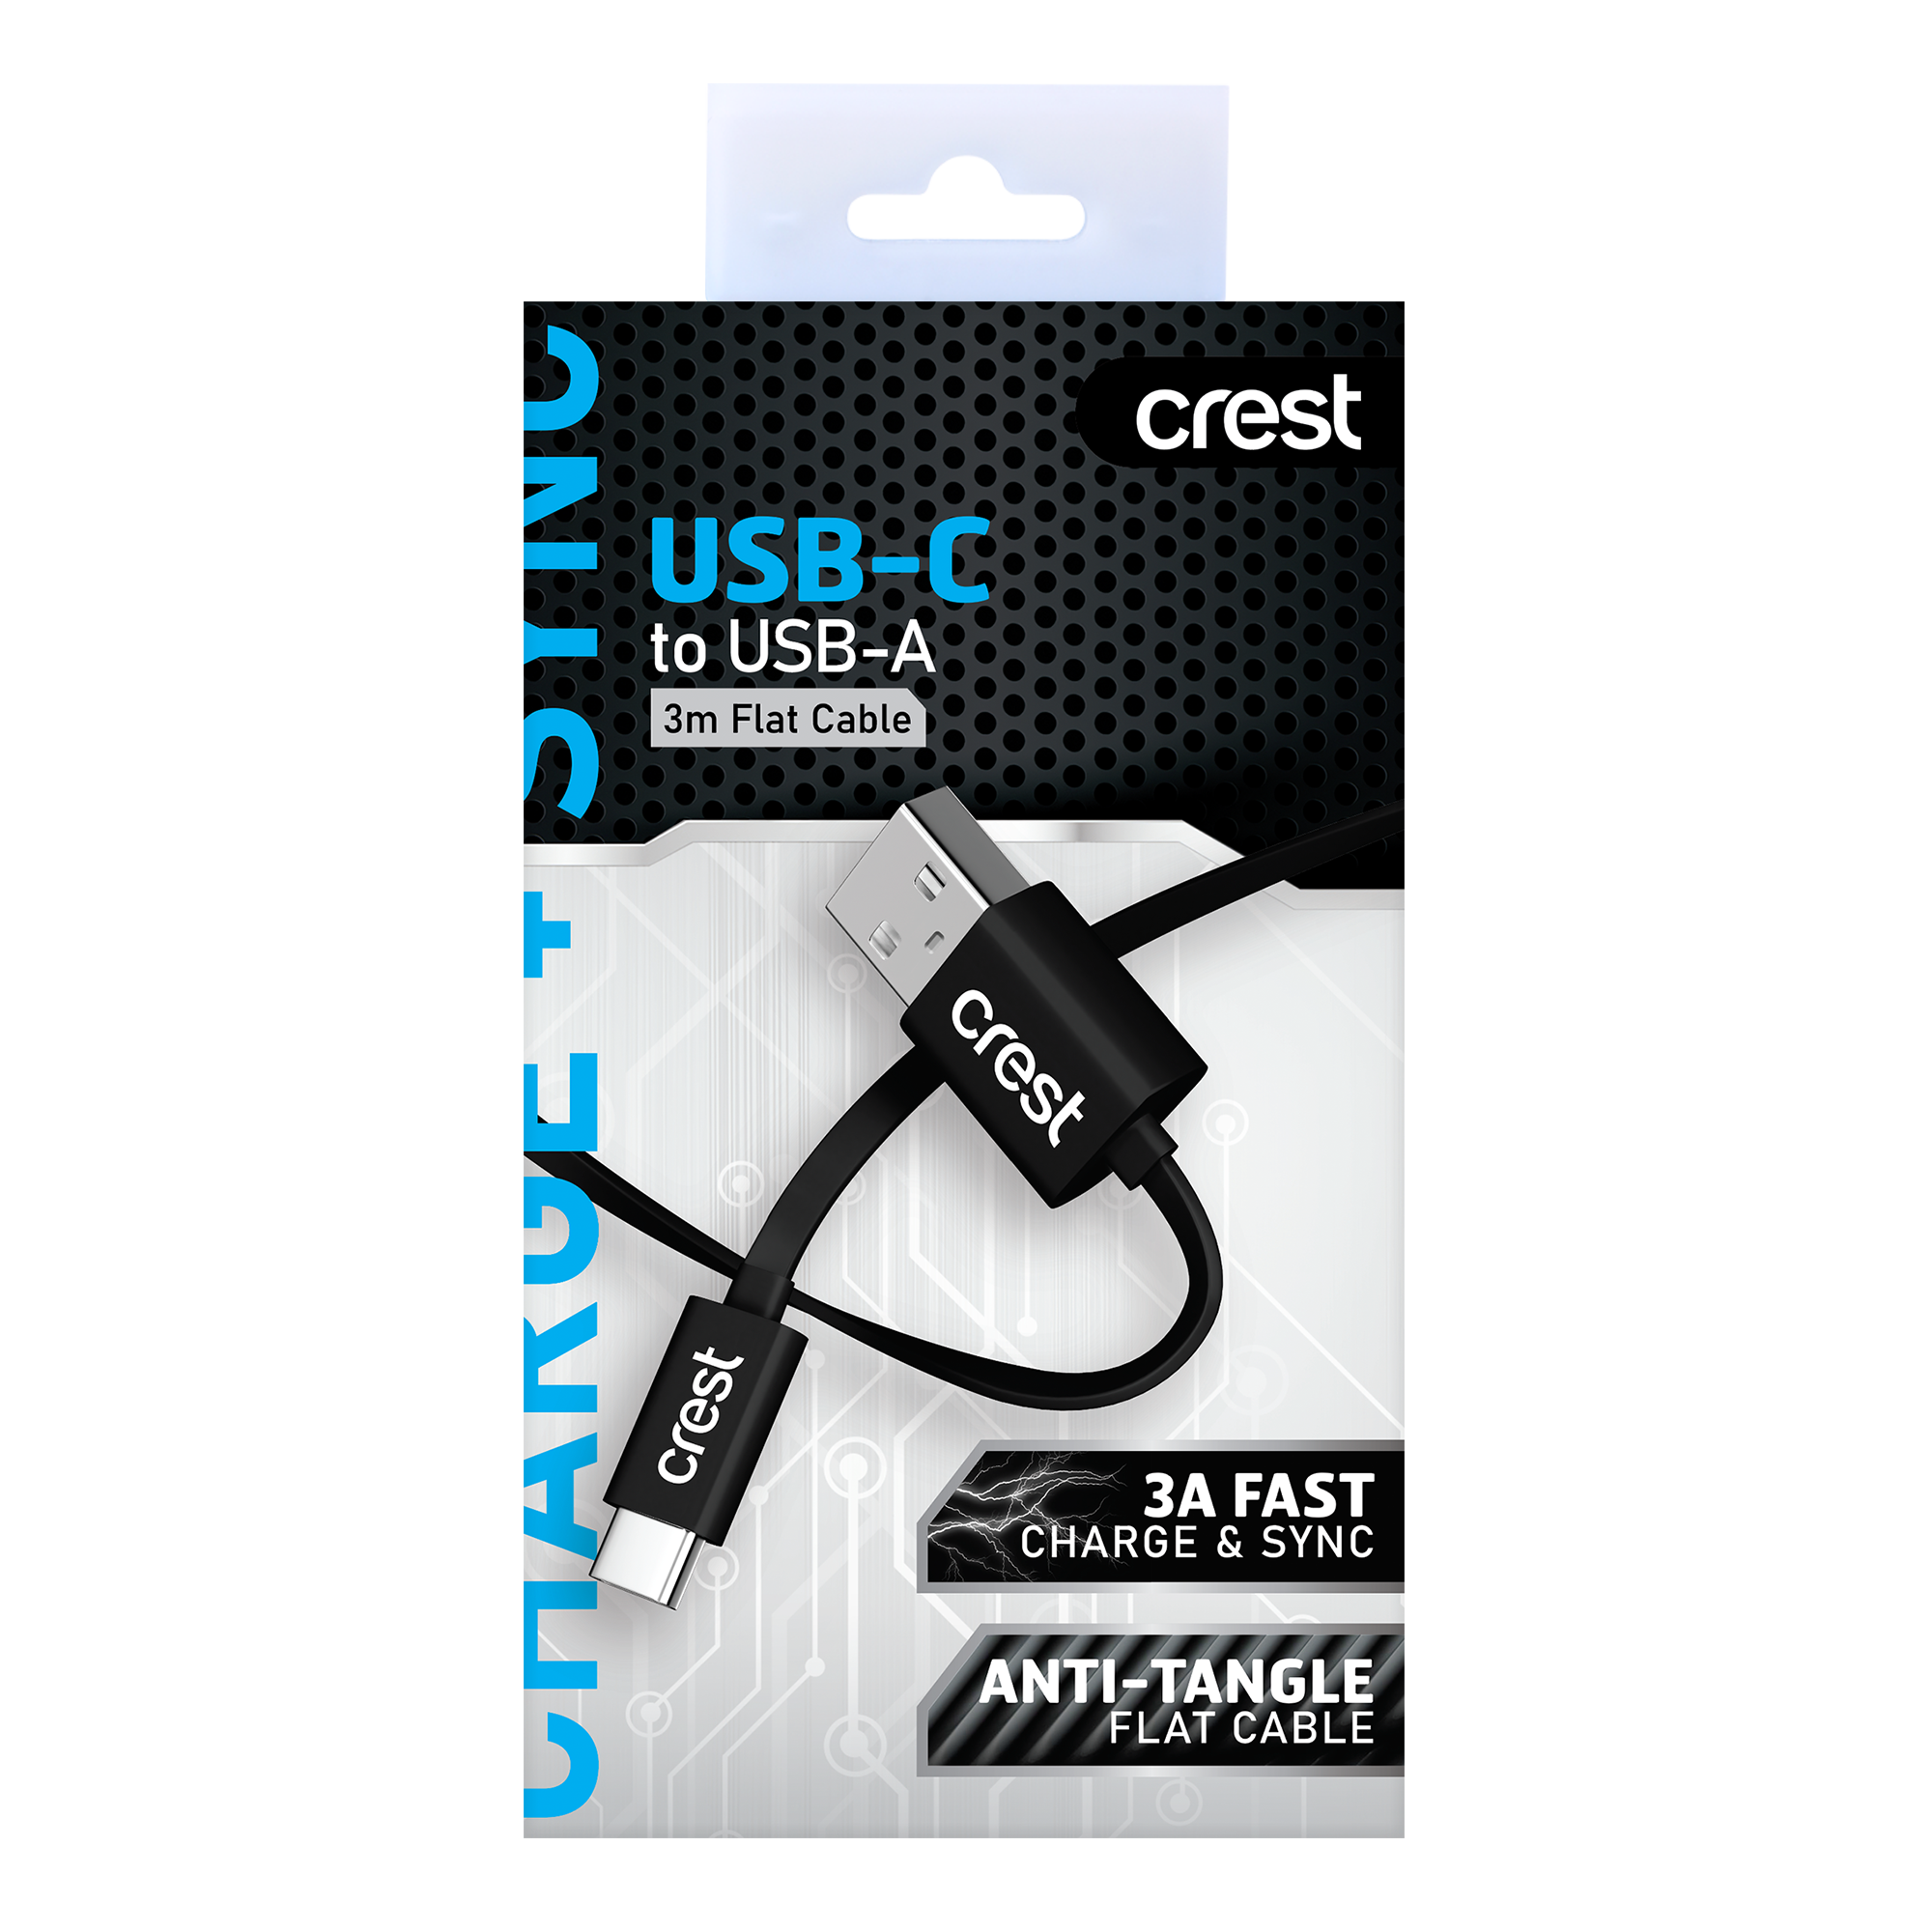 USB-C to USB-A Flat Cable 3M - Black